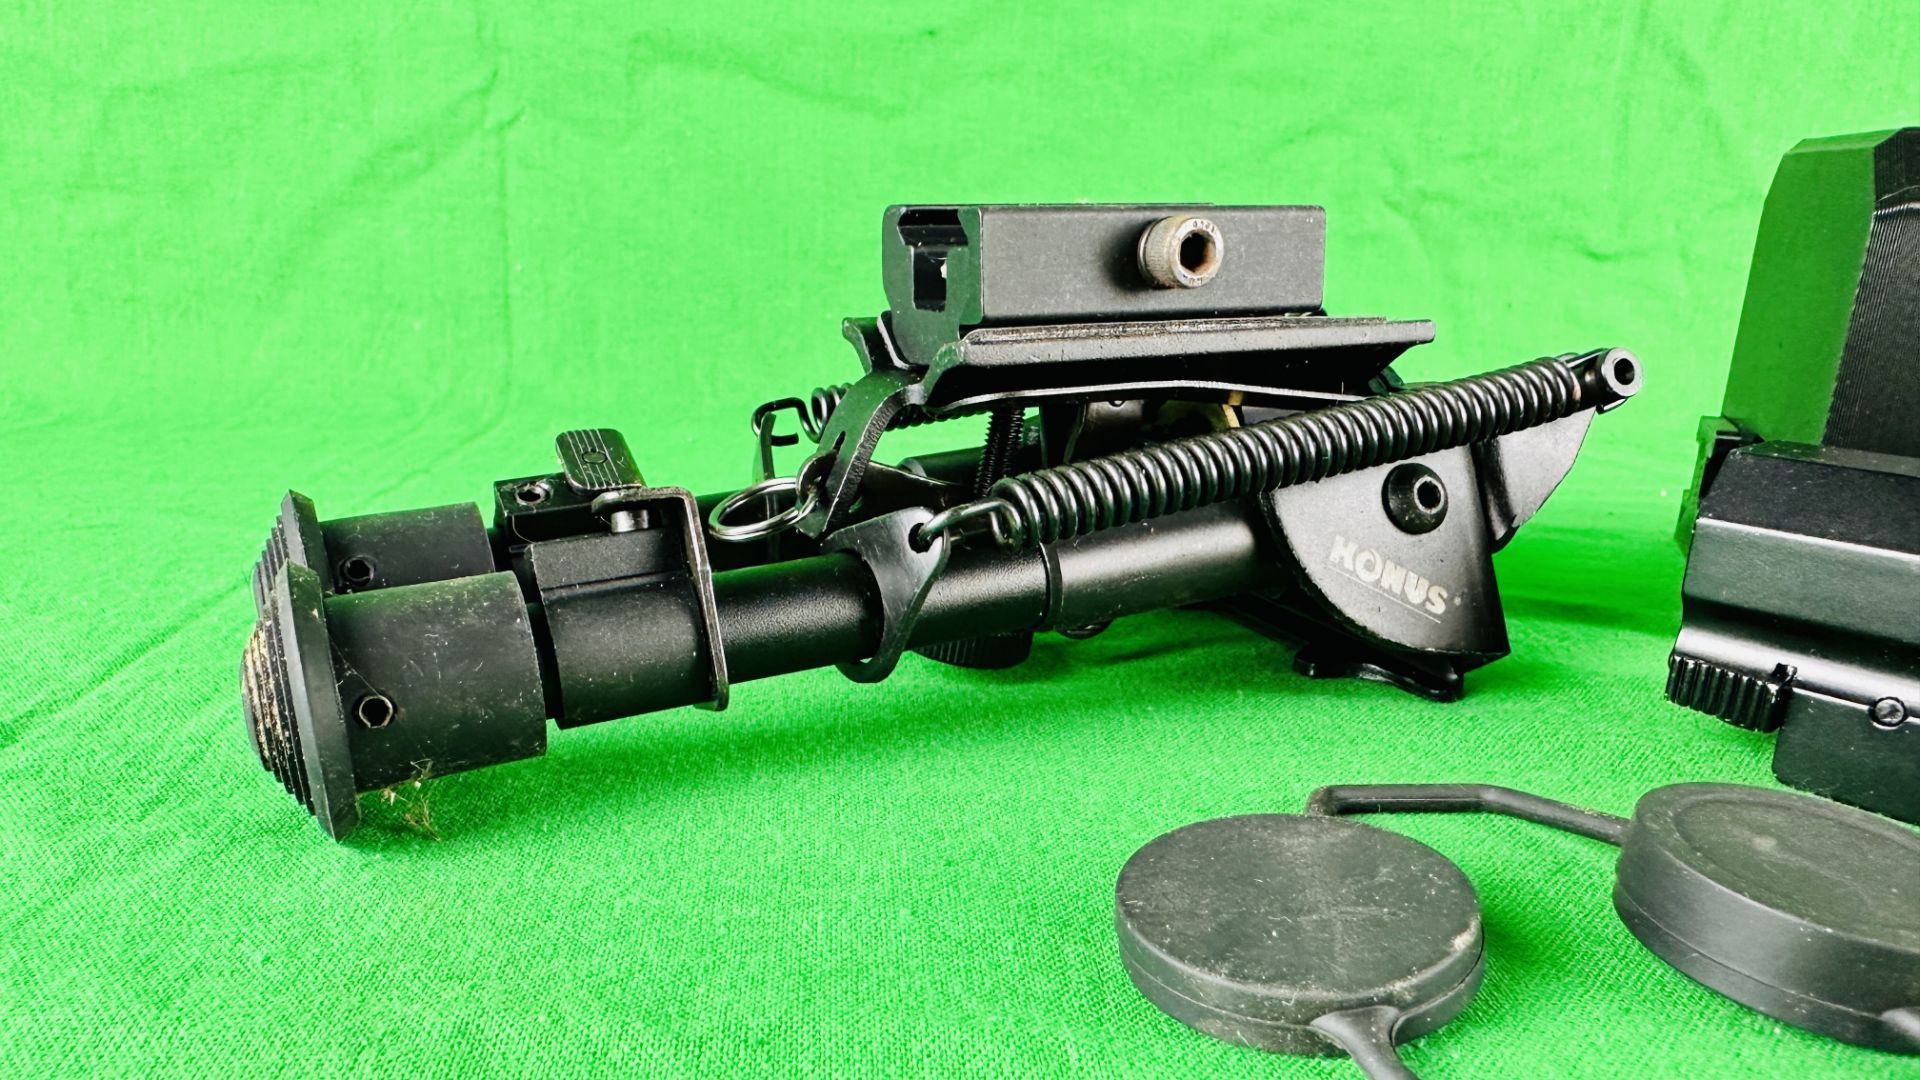 2X40RD, RED DOT SCOPE, BI-POD, VAST FIRE RED LIGHT TORCH, HAWKE RED DOT SCOPE AND RIFLE HOLDER. - Image 4 of 7